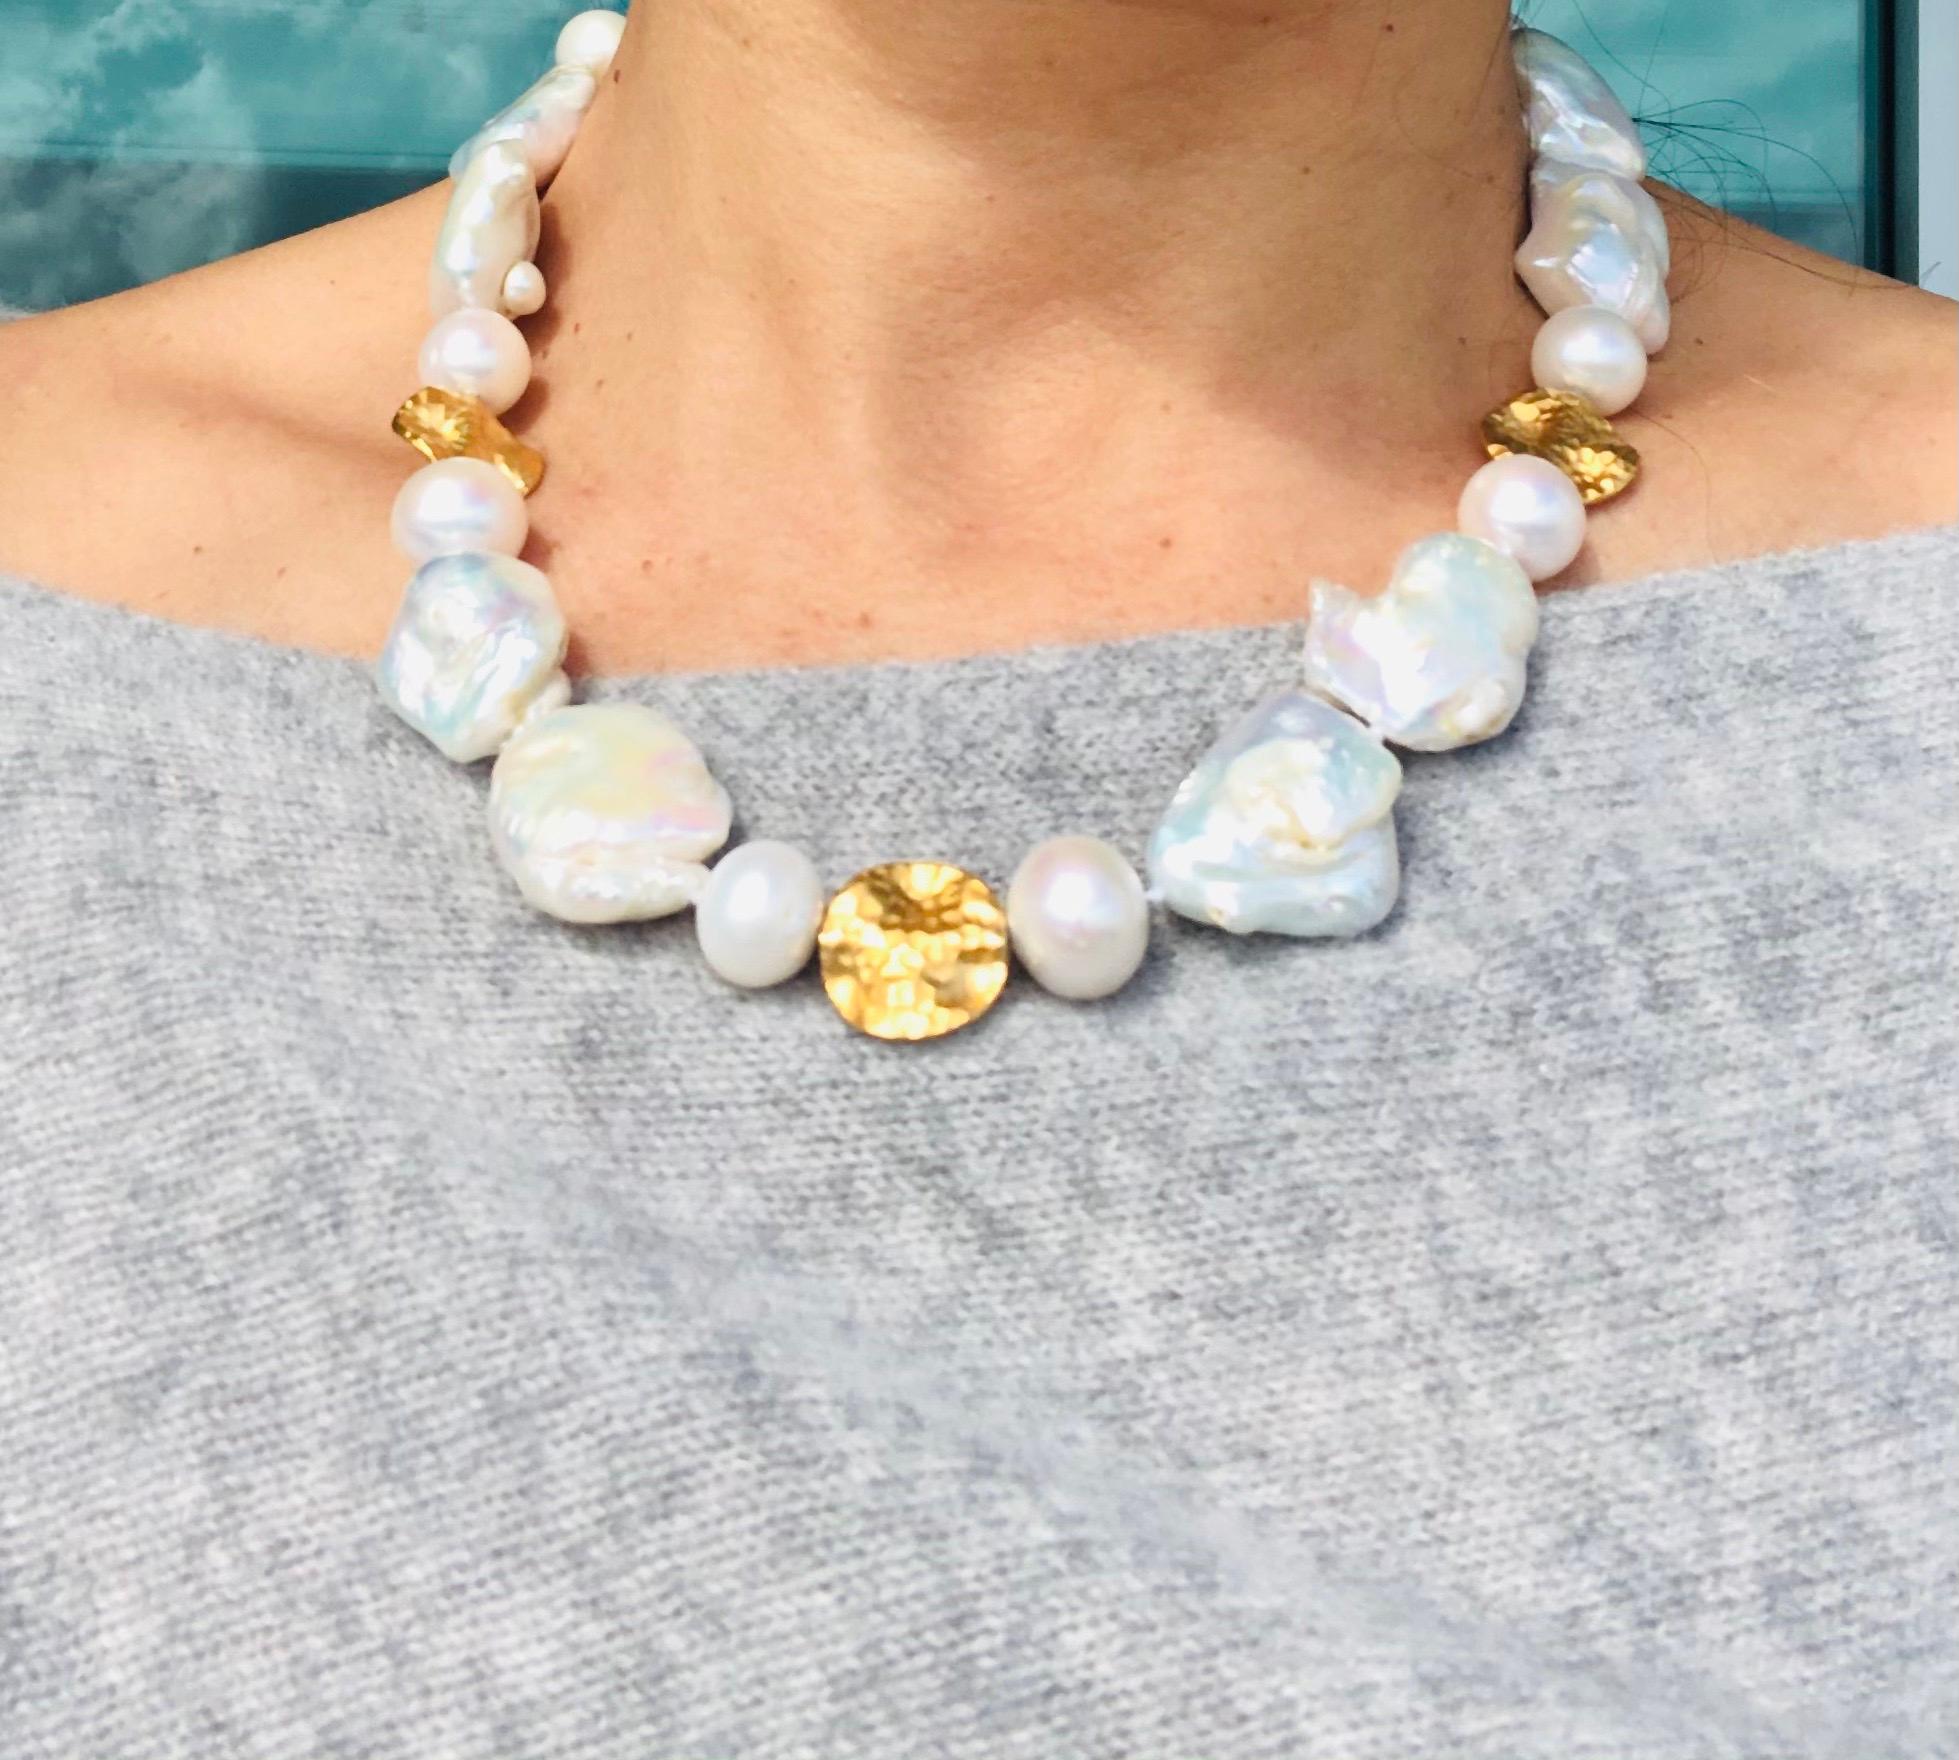 
Not your grandma’s strand of pearls.

Introducing the 